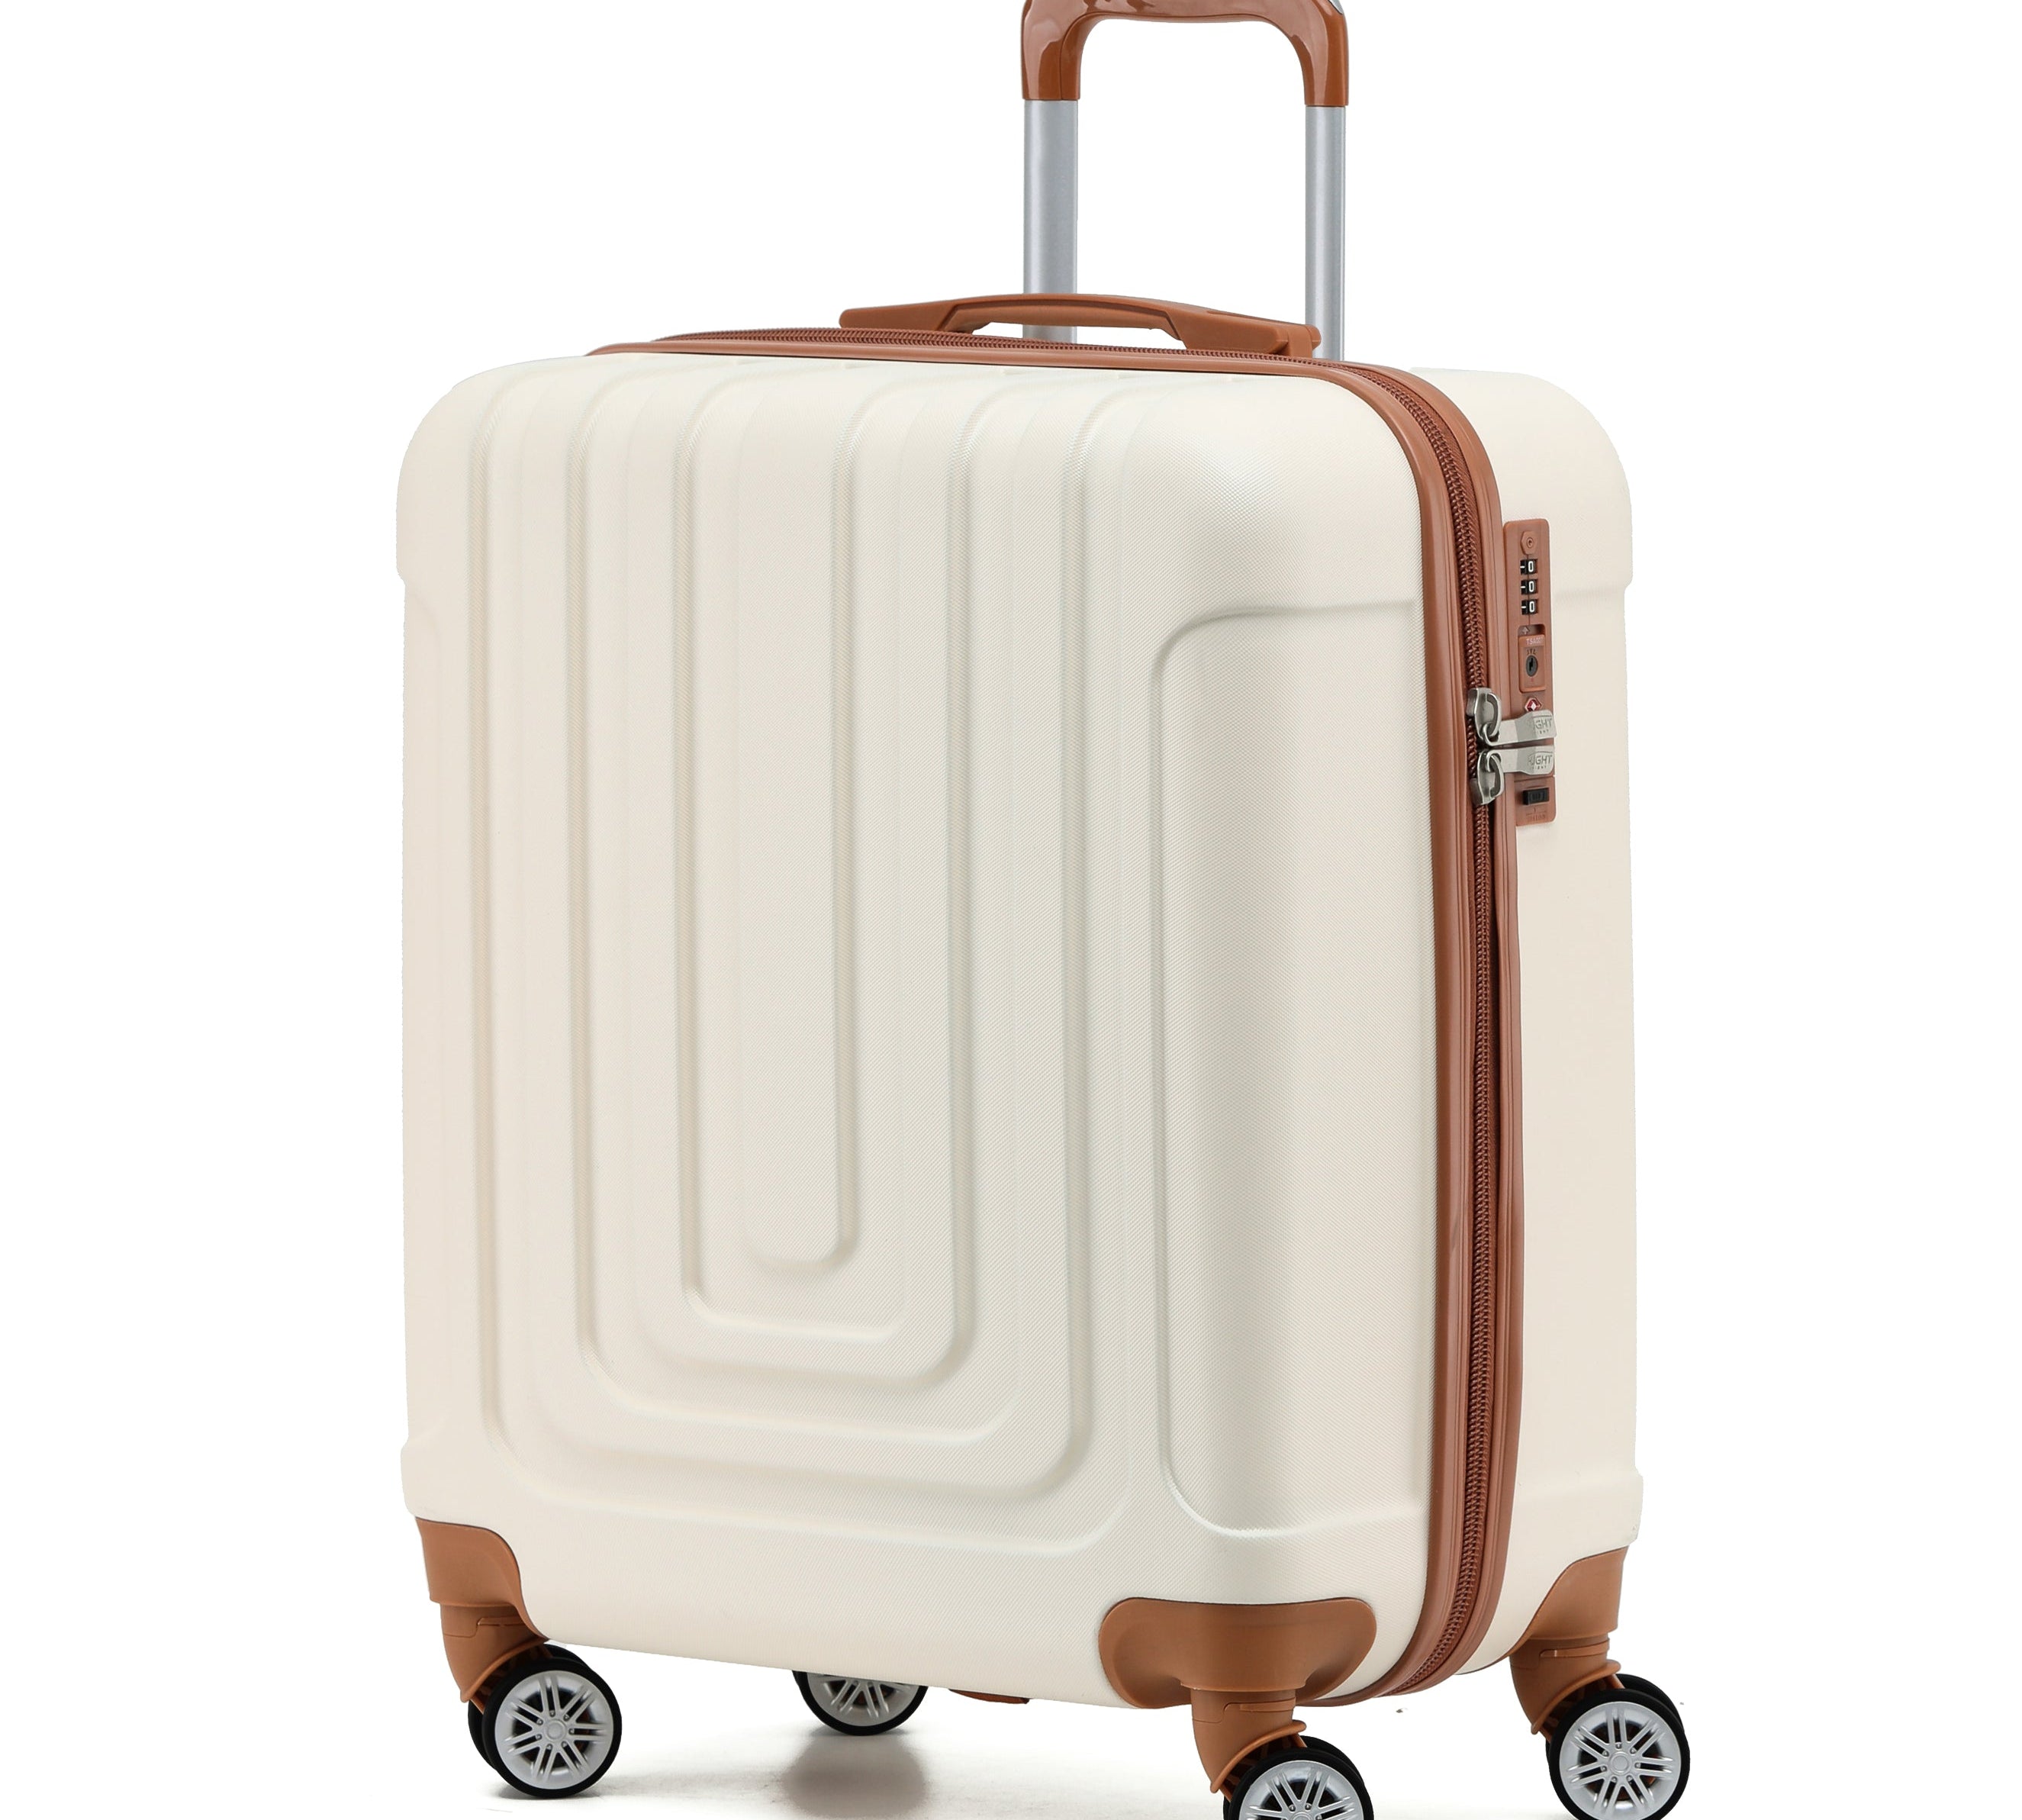 56x45x25cm Premium Hard Shell Lightweight Cabin Suitcase - 8 Spinner Wheels - Built-in TSA Lock & USB Port - Approved for easyJet Large Cabin Carry on